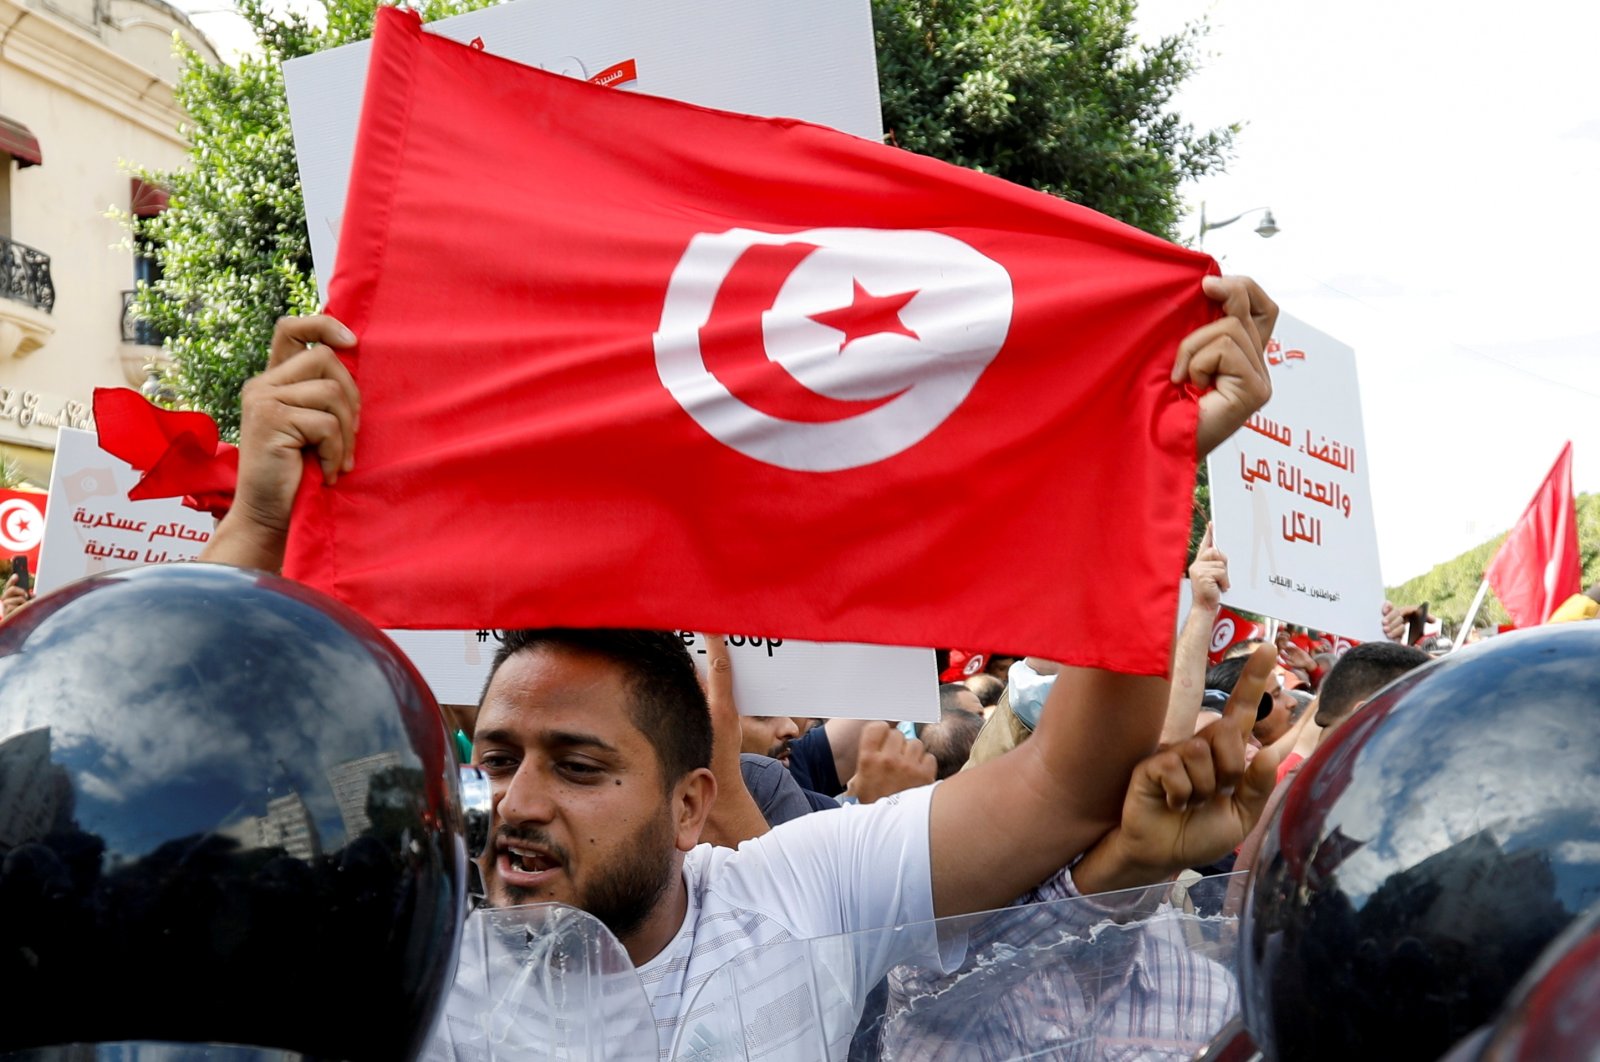 A demonstrator carries a Tunisian flag as he speaks with police during a protest against Tunisian President Kais Saied's seizure of governing powers, in Tunis, Tunisia, Oct. 10, 2021. (Reuters Photo)